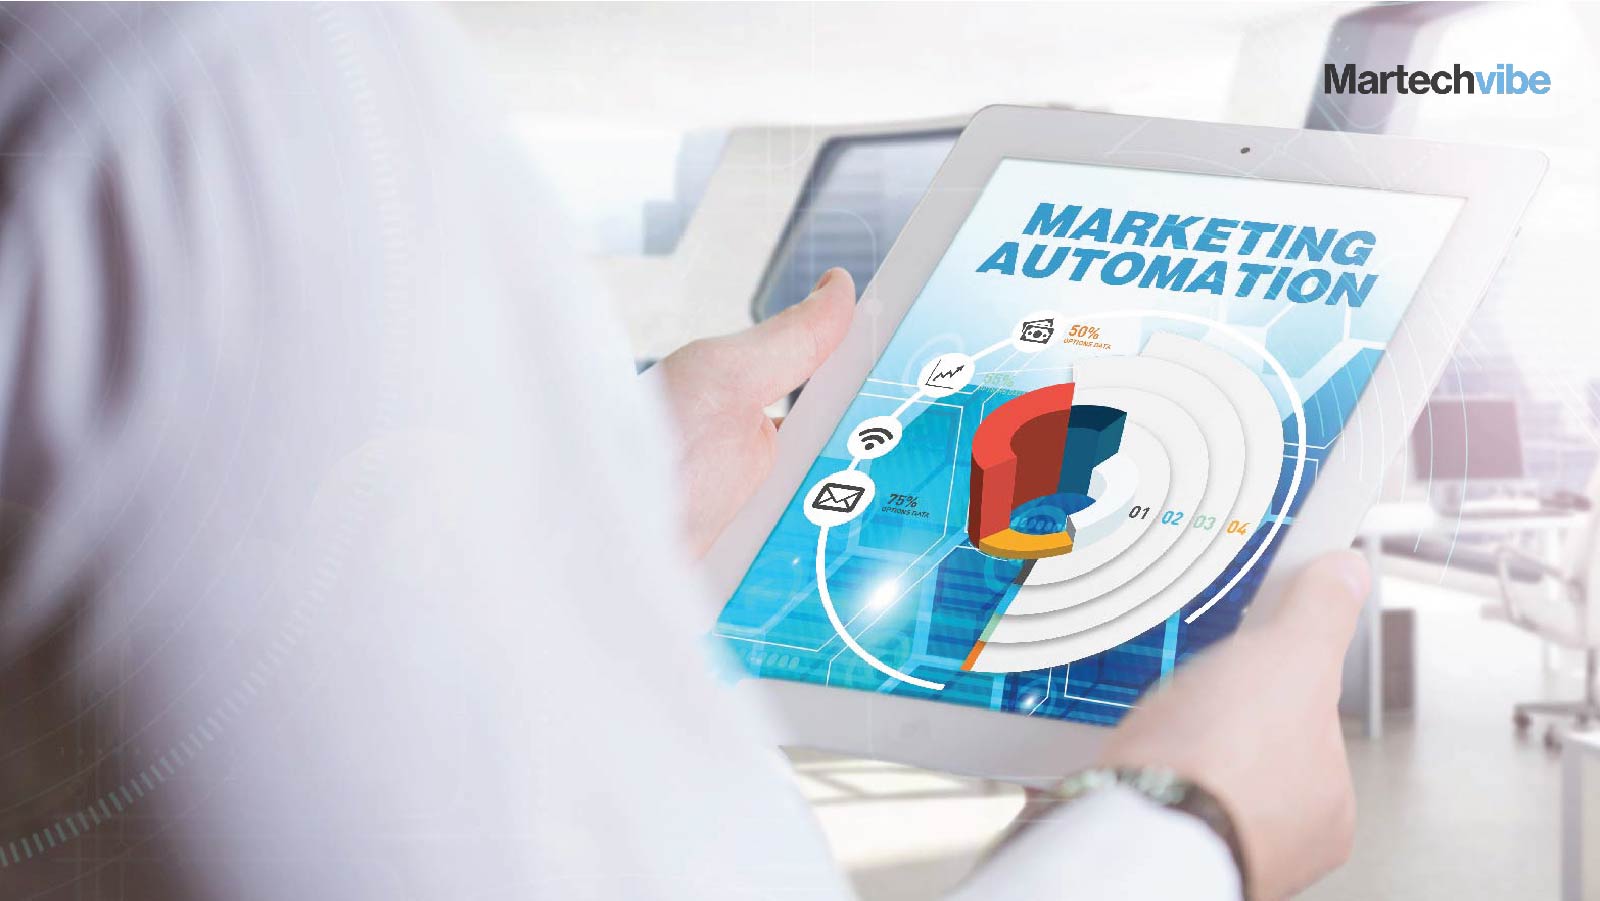 How Brands Need to Deal with Increased Marketing Automation